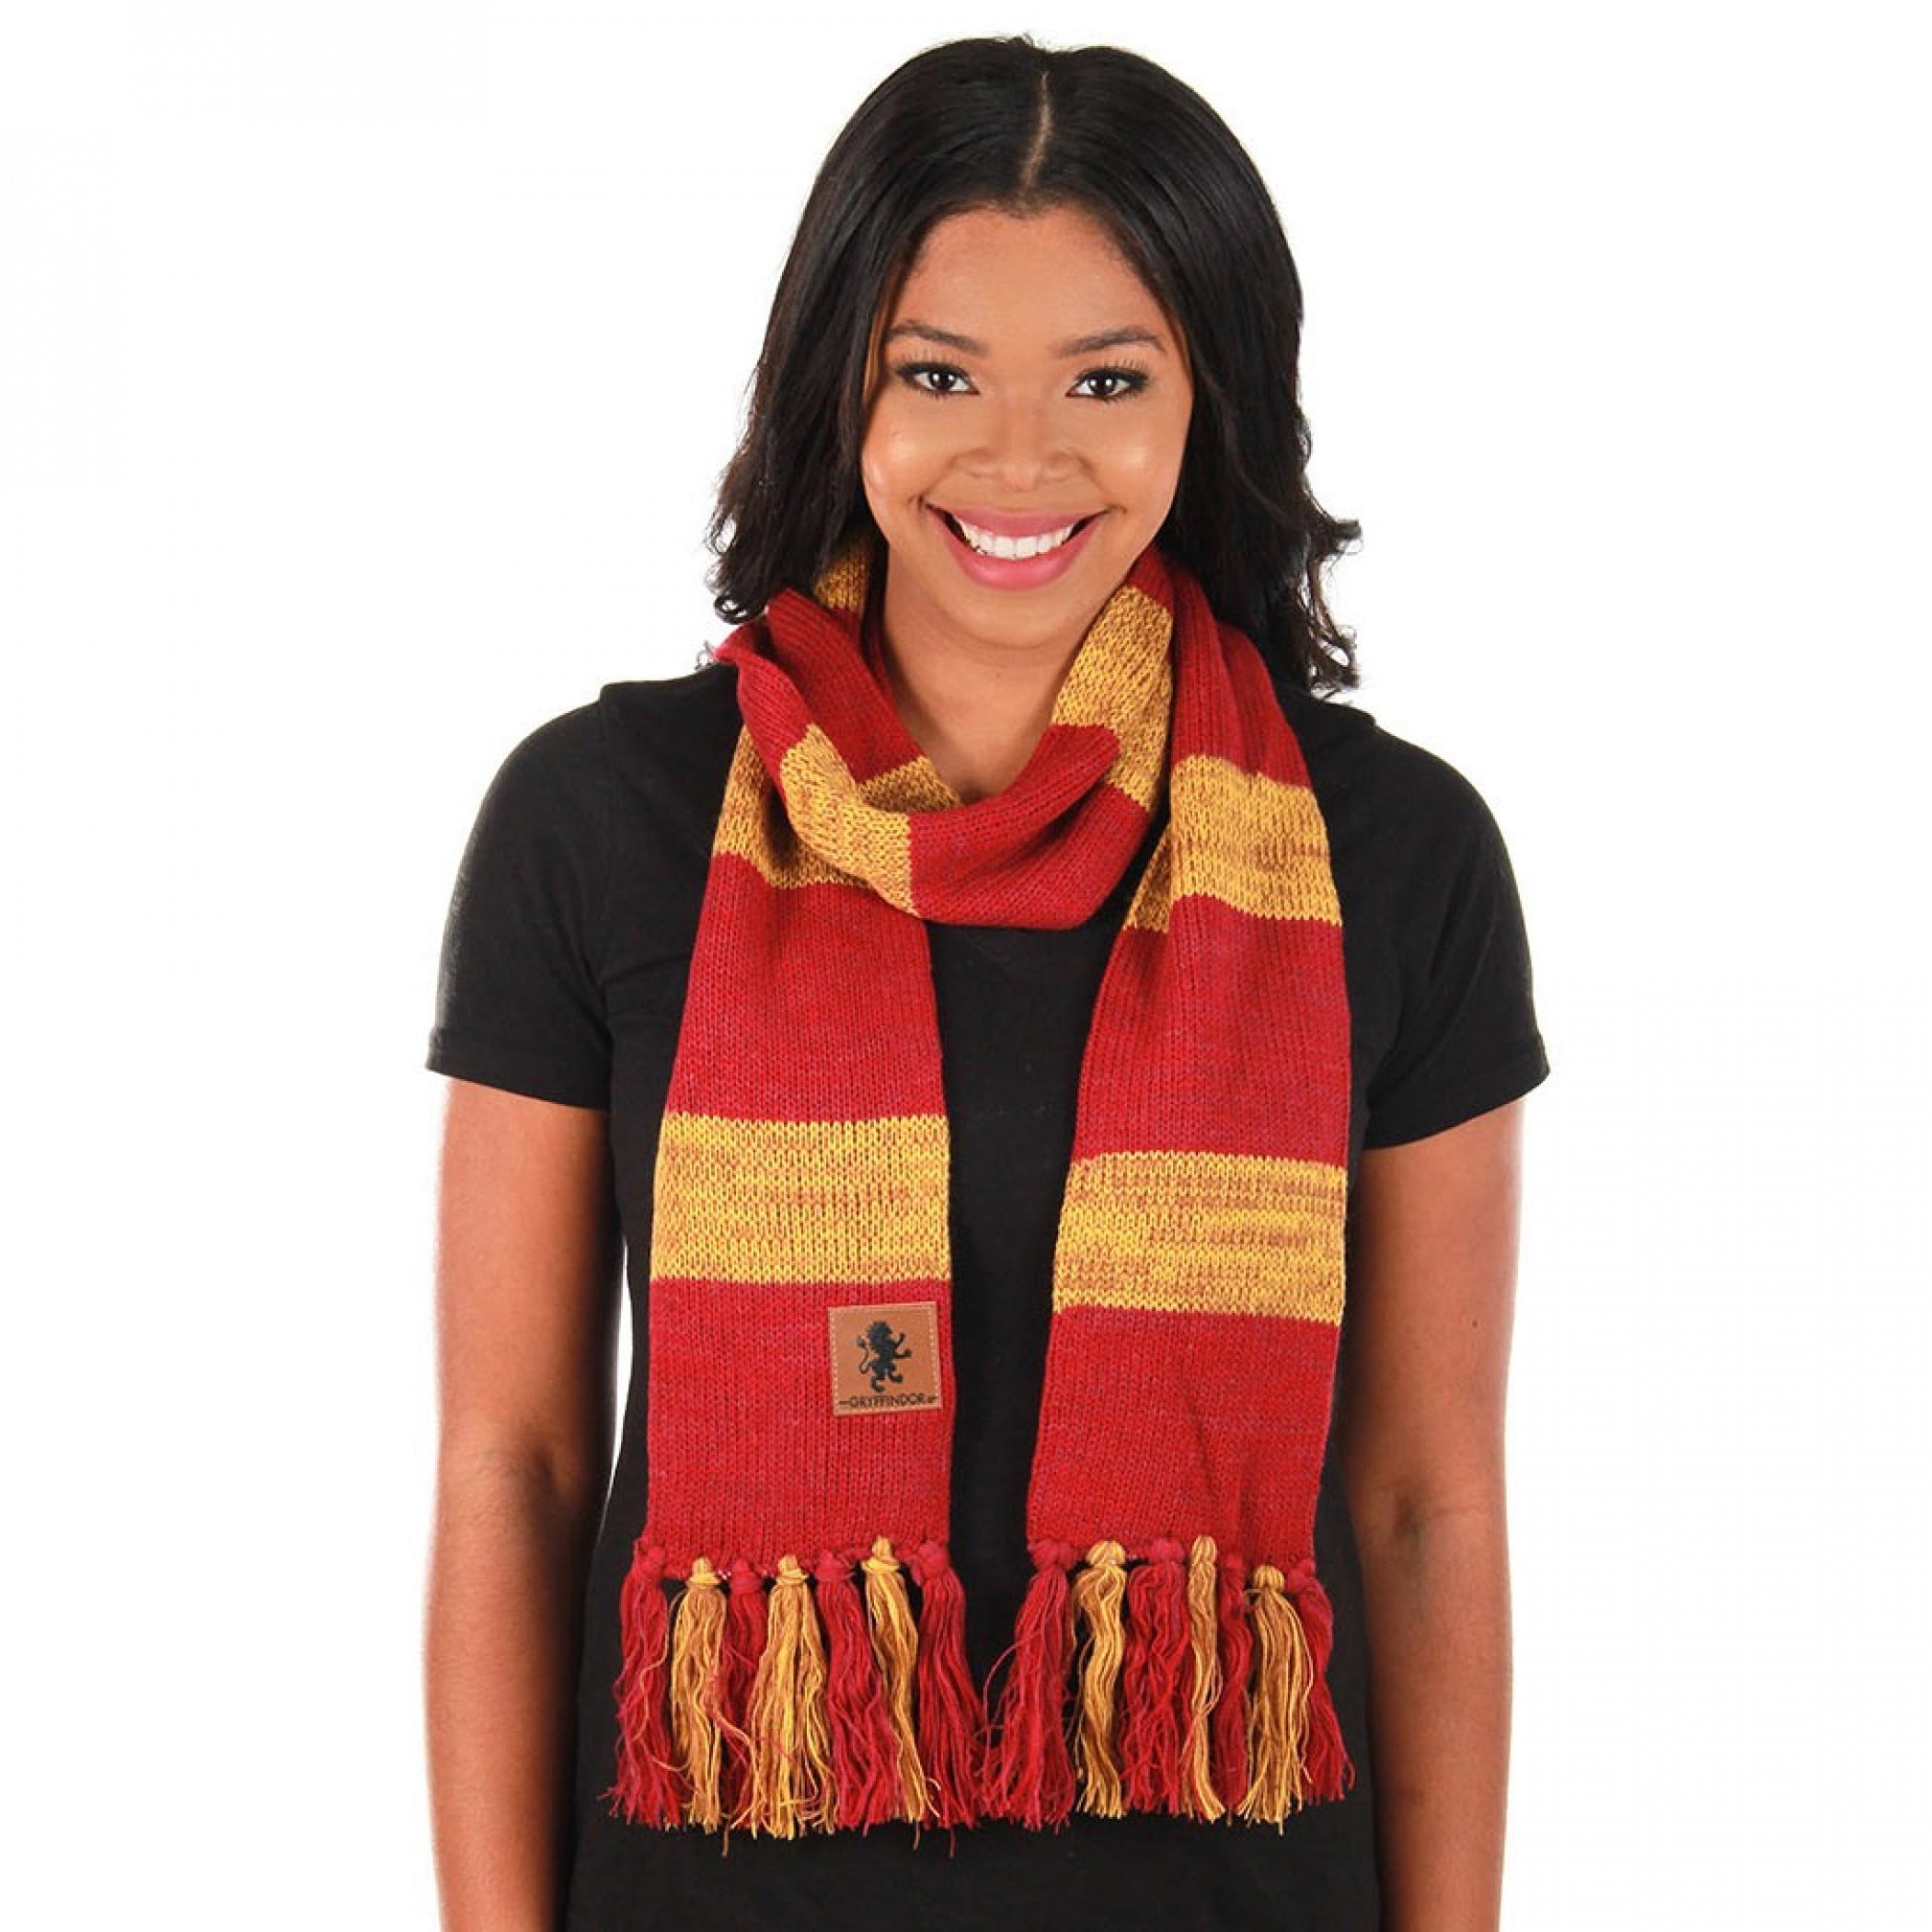 Warm flannel Harry Potter Infinity Scarf! Great for that Potter fan